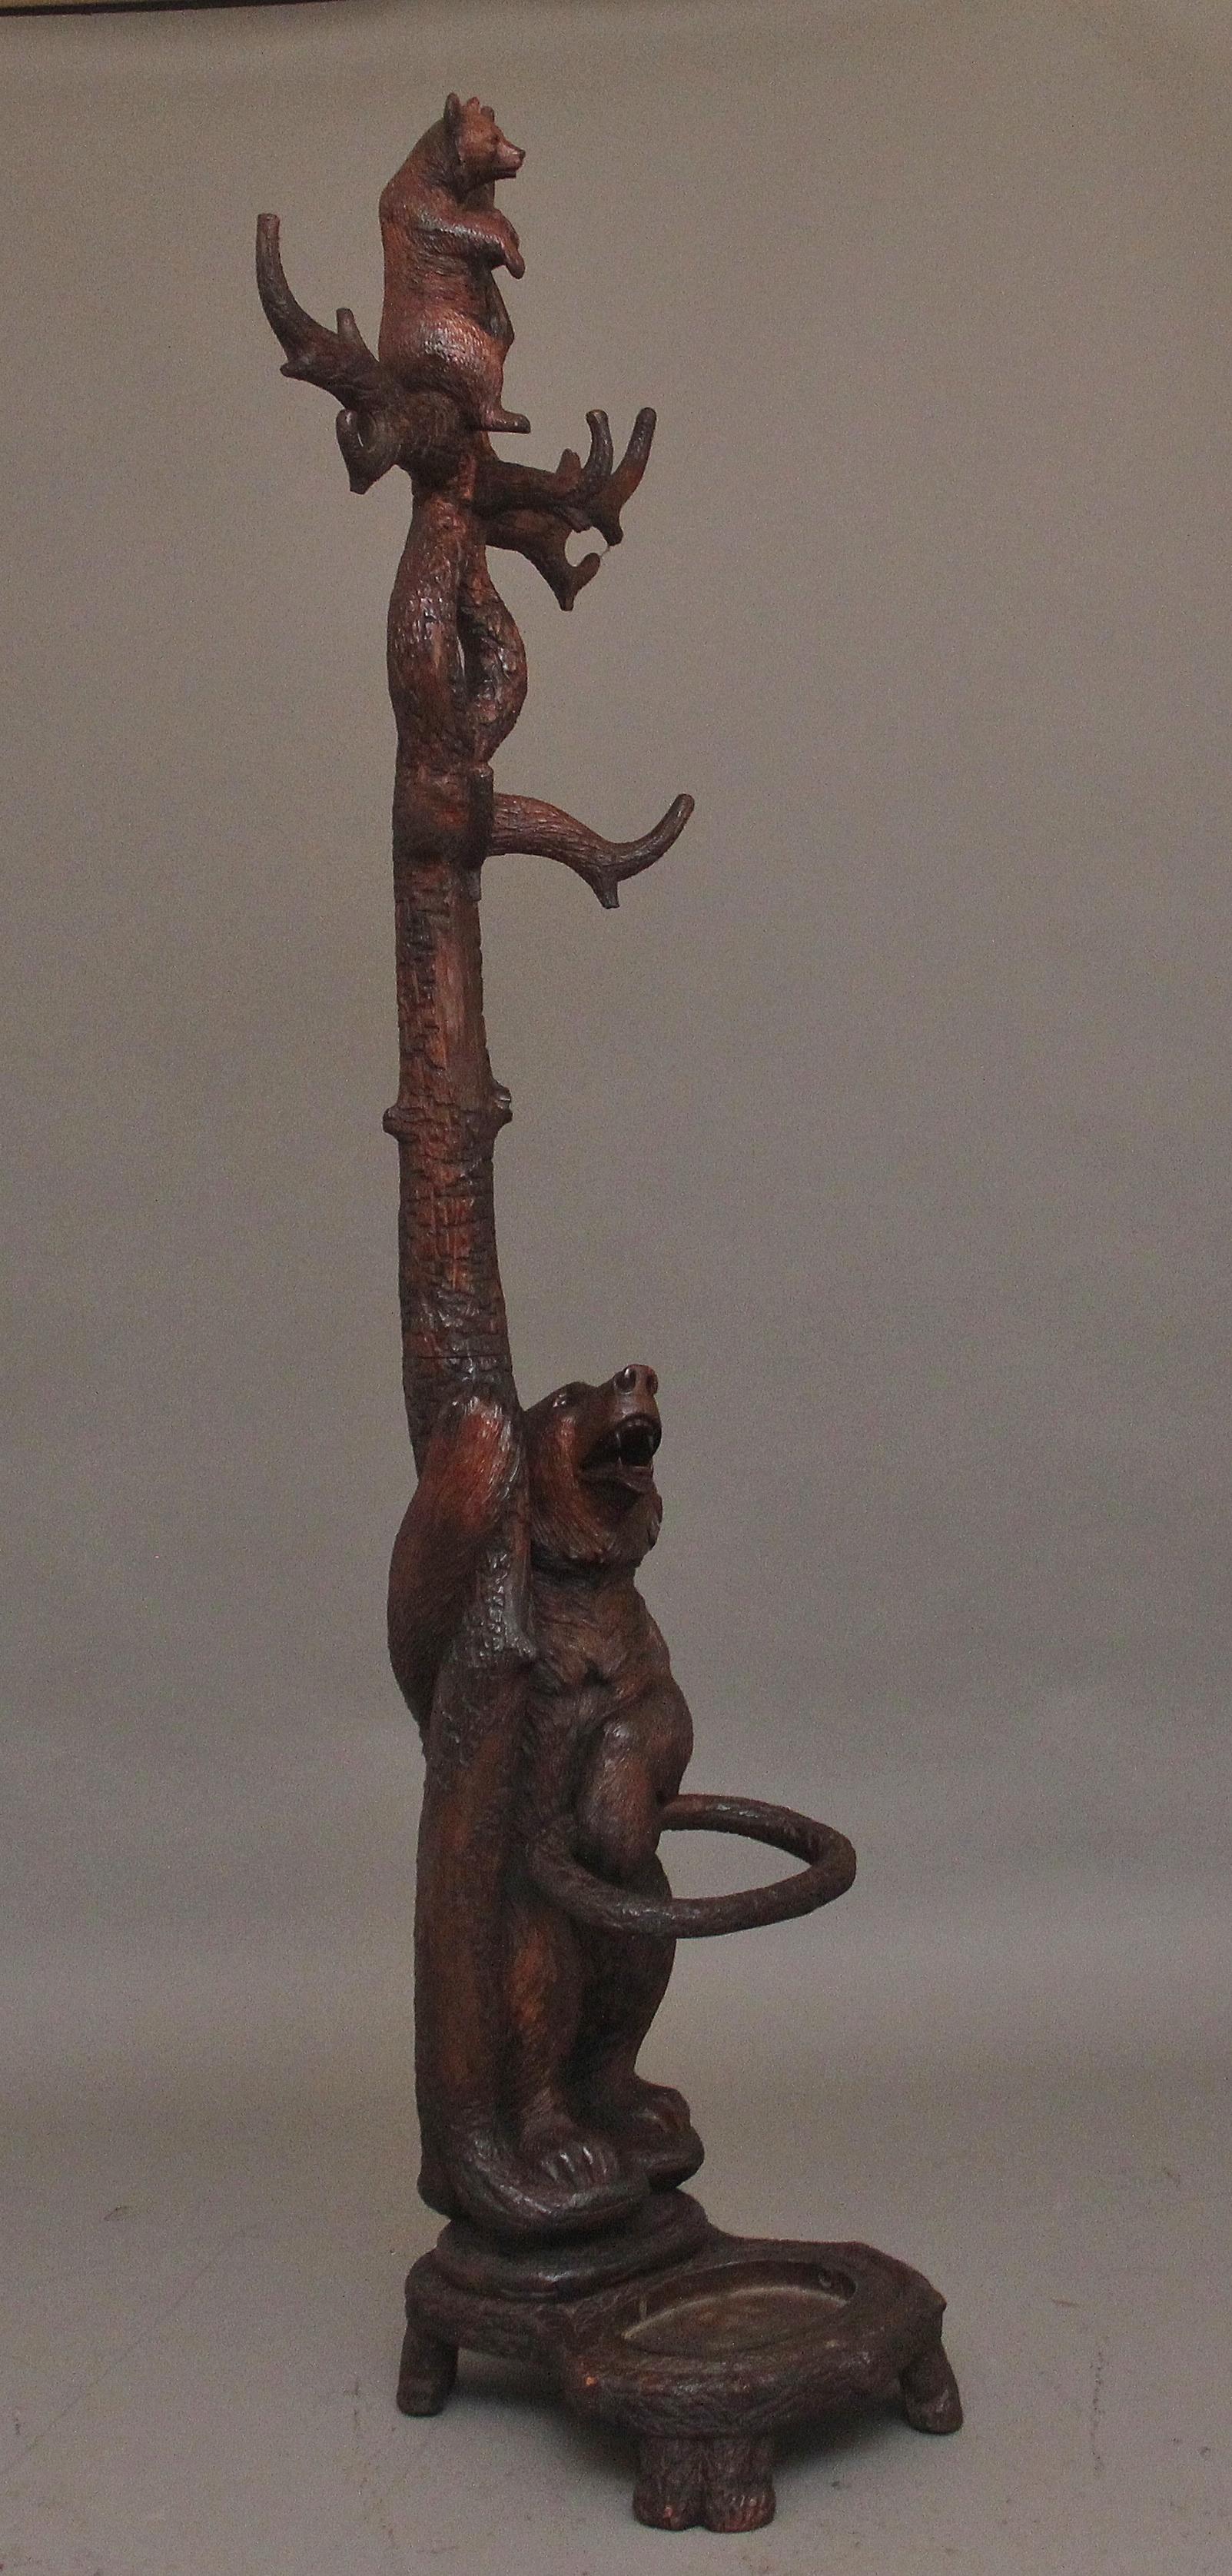 A finely carved early 20th Century walnut black forest bear hall stand with a cub playing in the branches above, the bear below looking up and holding and standing on an umbrella stand, the construction is very sturdy and the branches are more than